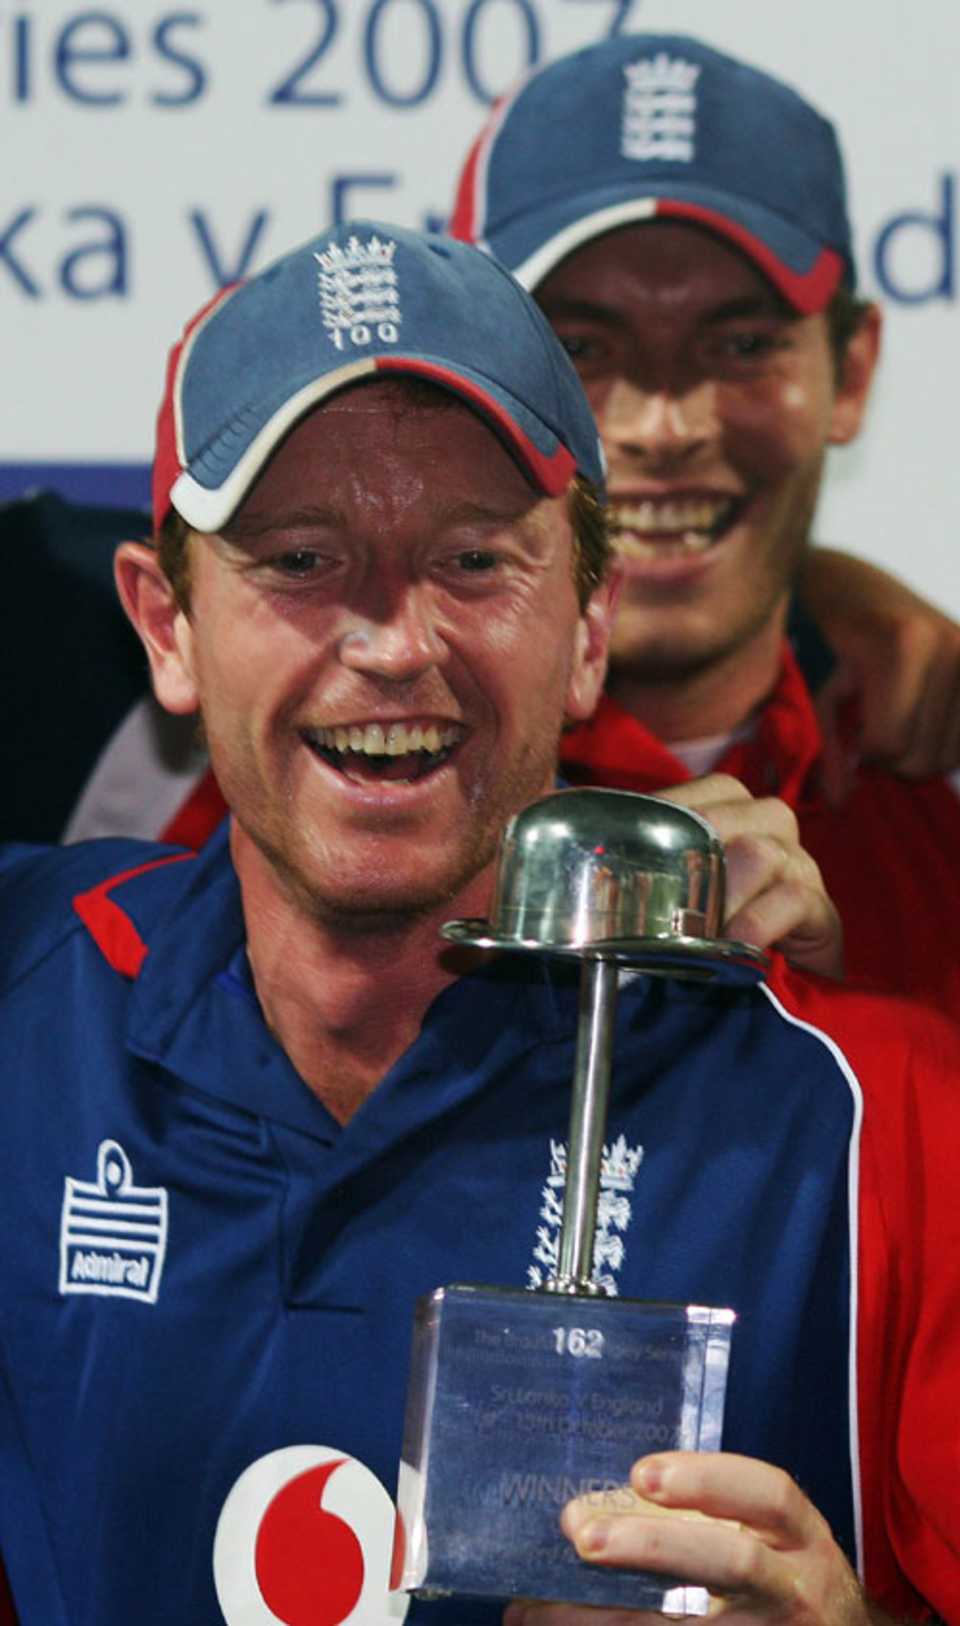 Paul Collingwood is all smiles with the series silverware